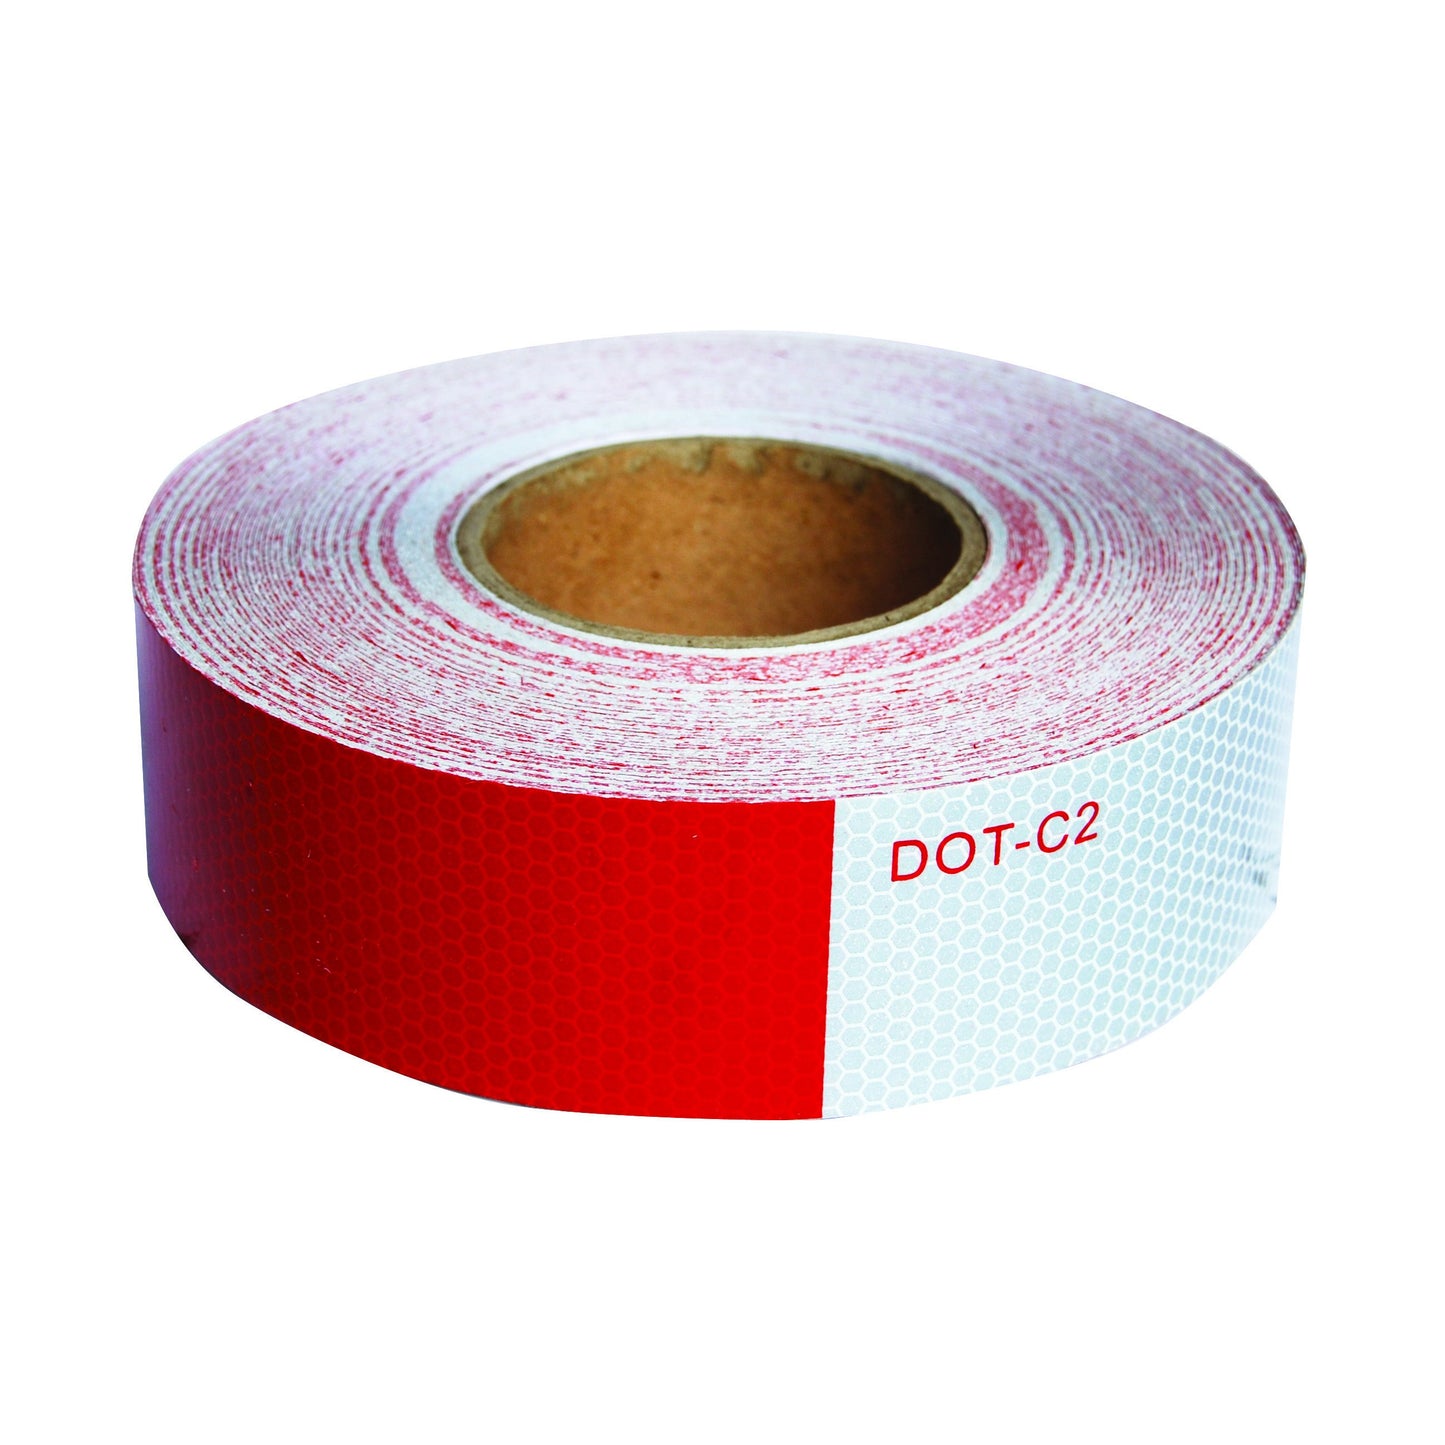 DOT-C2 Reflective Conspicuity Tape 2" x 150' Red & White for Truck and Trailers